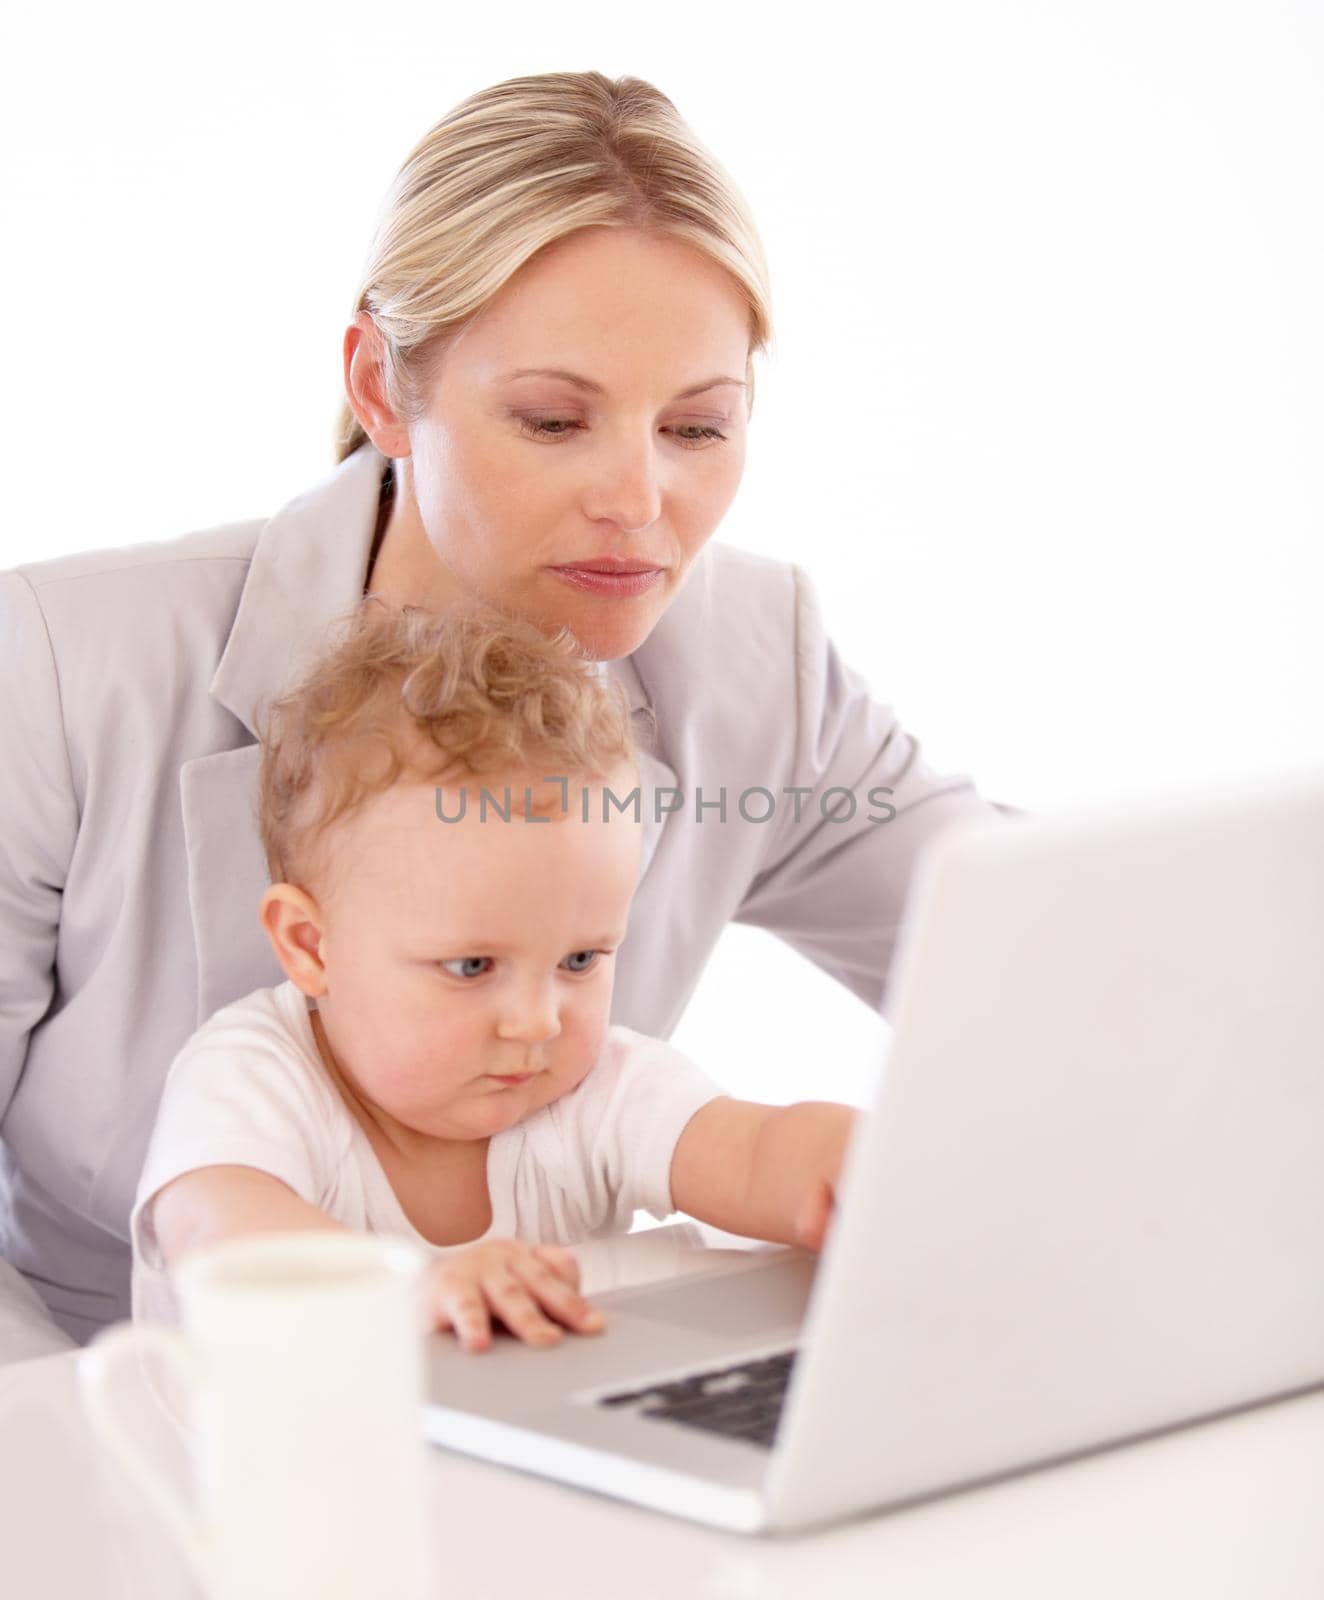 A businesswoman working on her laptop with her baby on her lap.